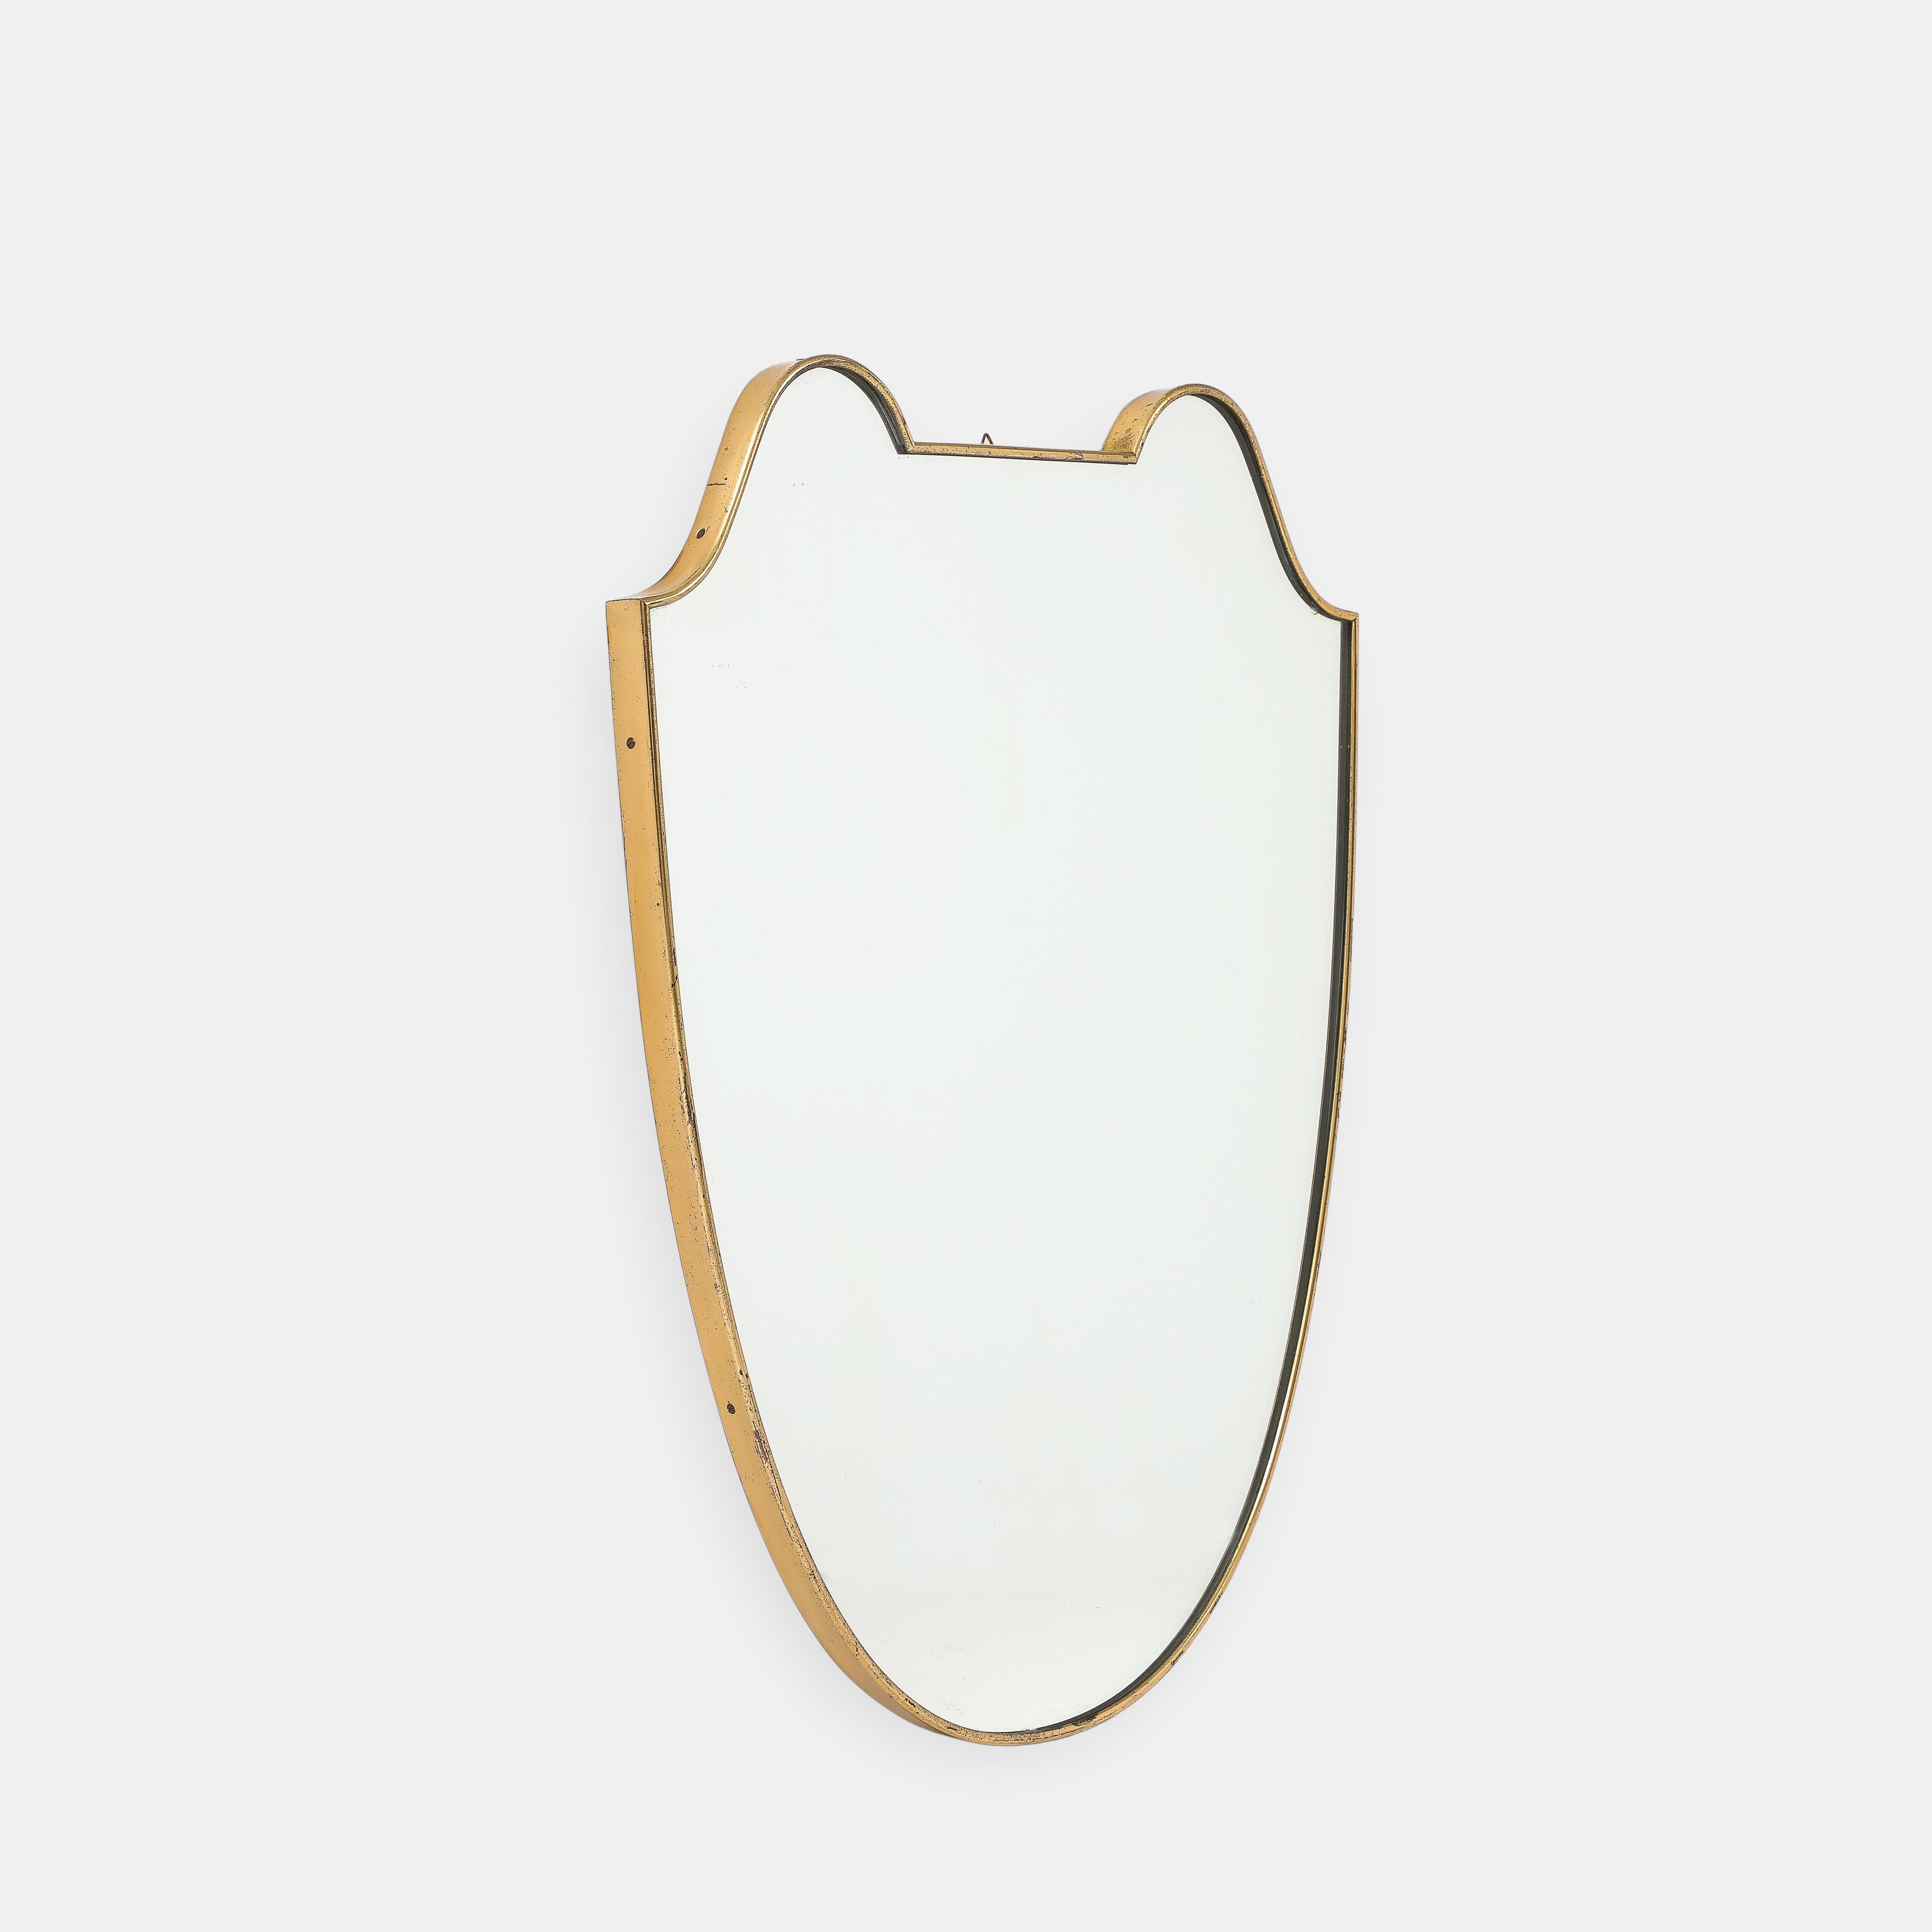 1950s Italian shield shaped brass wall mirror. This original midcentury period mirror has a lovely curved form and a beautiful rich patina to the brass with wood backing.